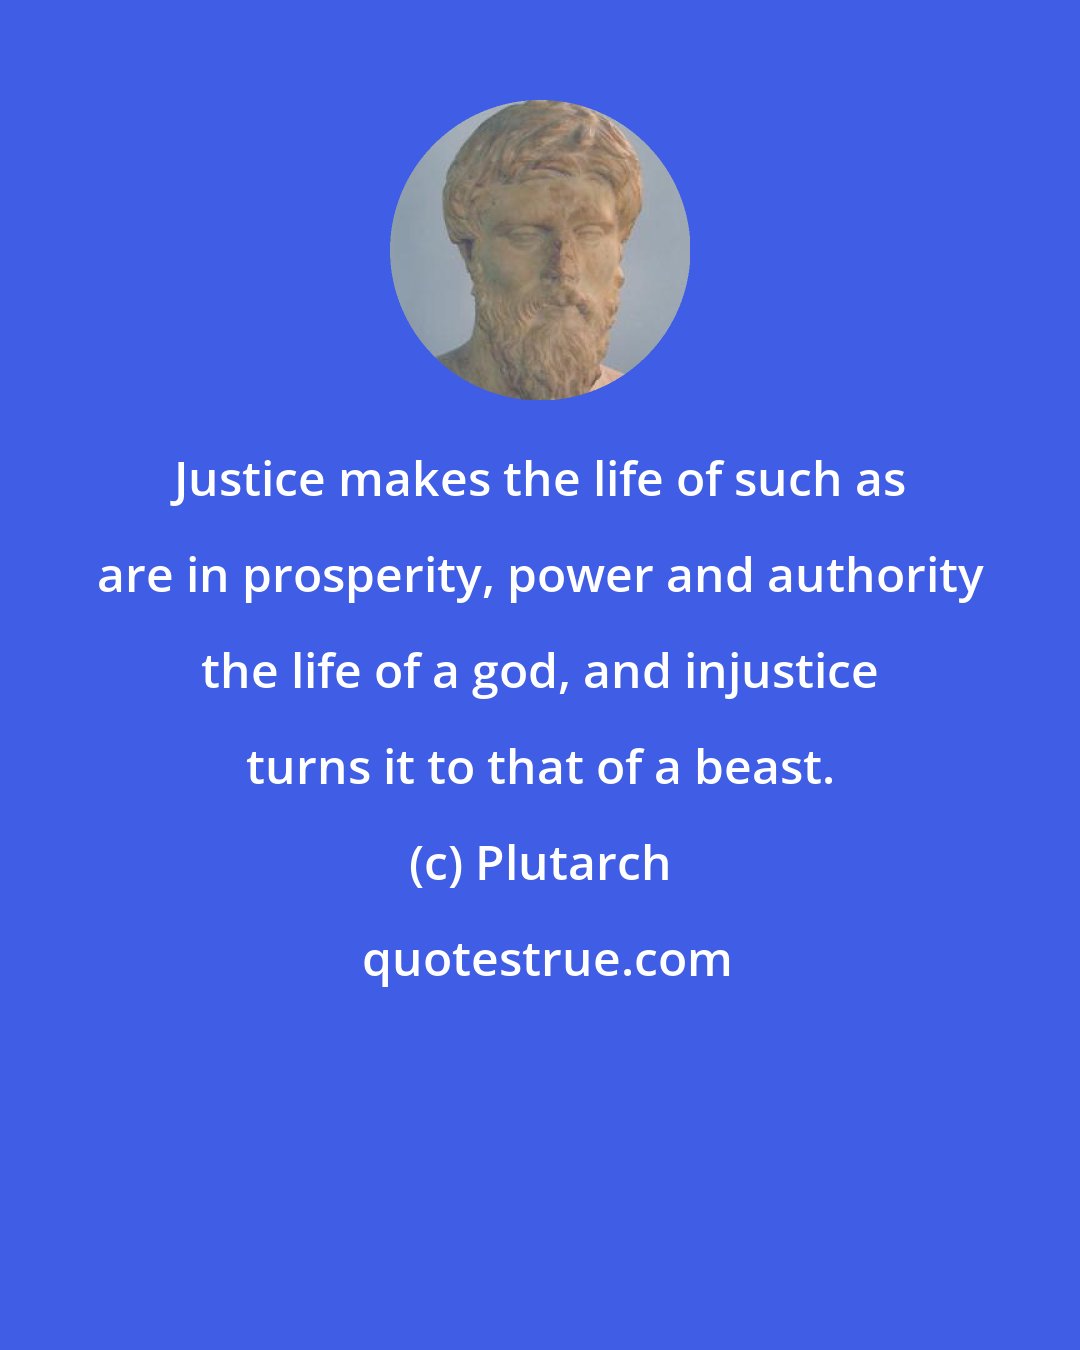 Plutarch: Justice makes the life of such as are in prosperity, power and authority the life of a god, and injustice turns it to that of a beast.